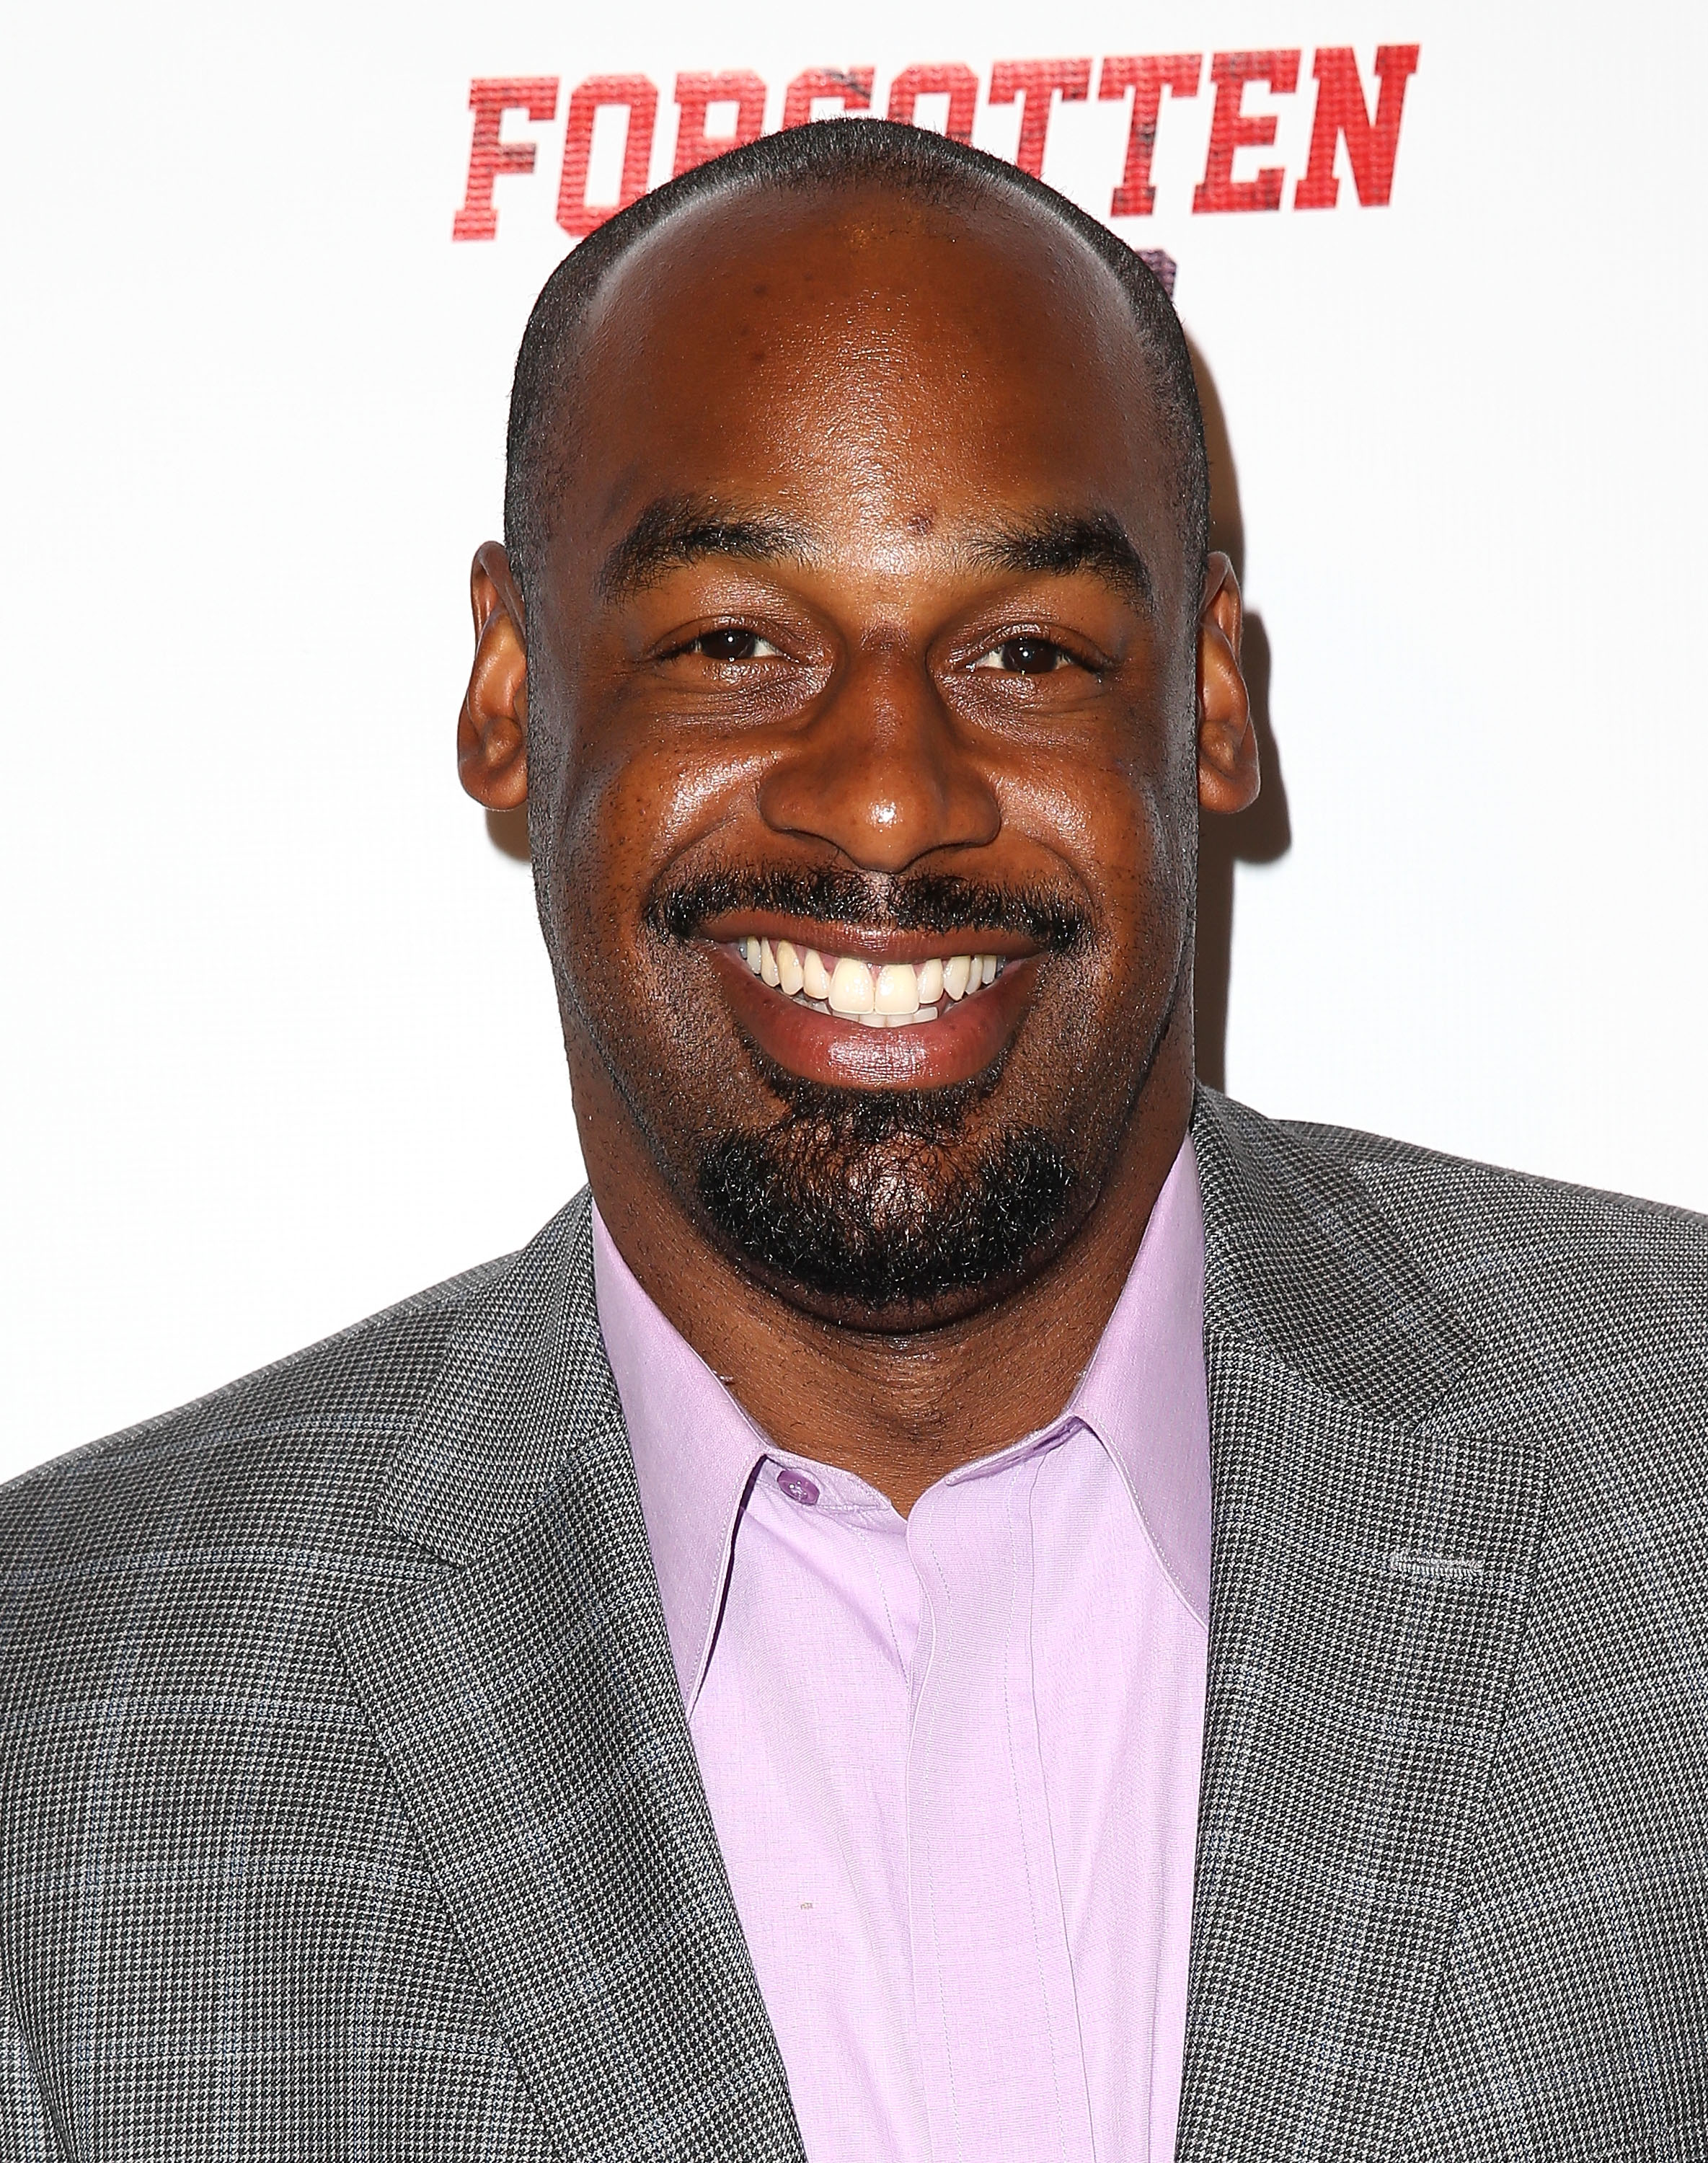 Former professional football player Donovan McNabb attends the 'Forgotten Four: The Integration Of Pro Football' screening presented by EPIX & UCLA at Royce Hall, UCLA on September 9, 2014 in Westwood, California. (Imeh Akpanudosen—Getty Images for EPIX)